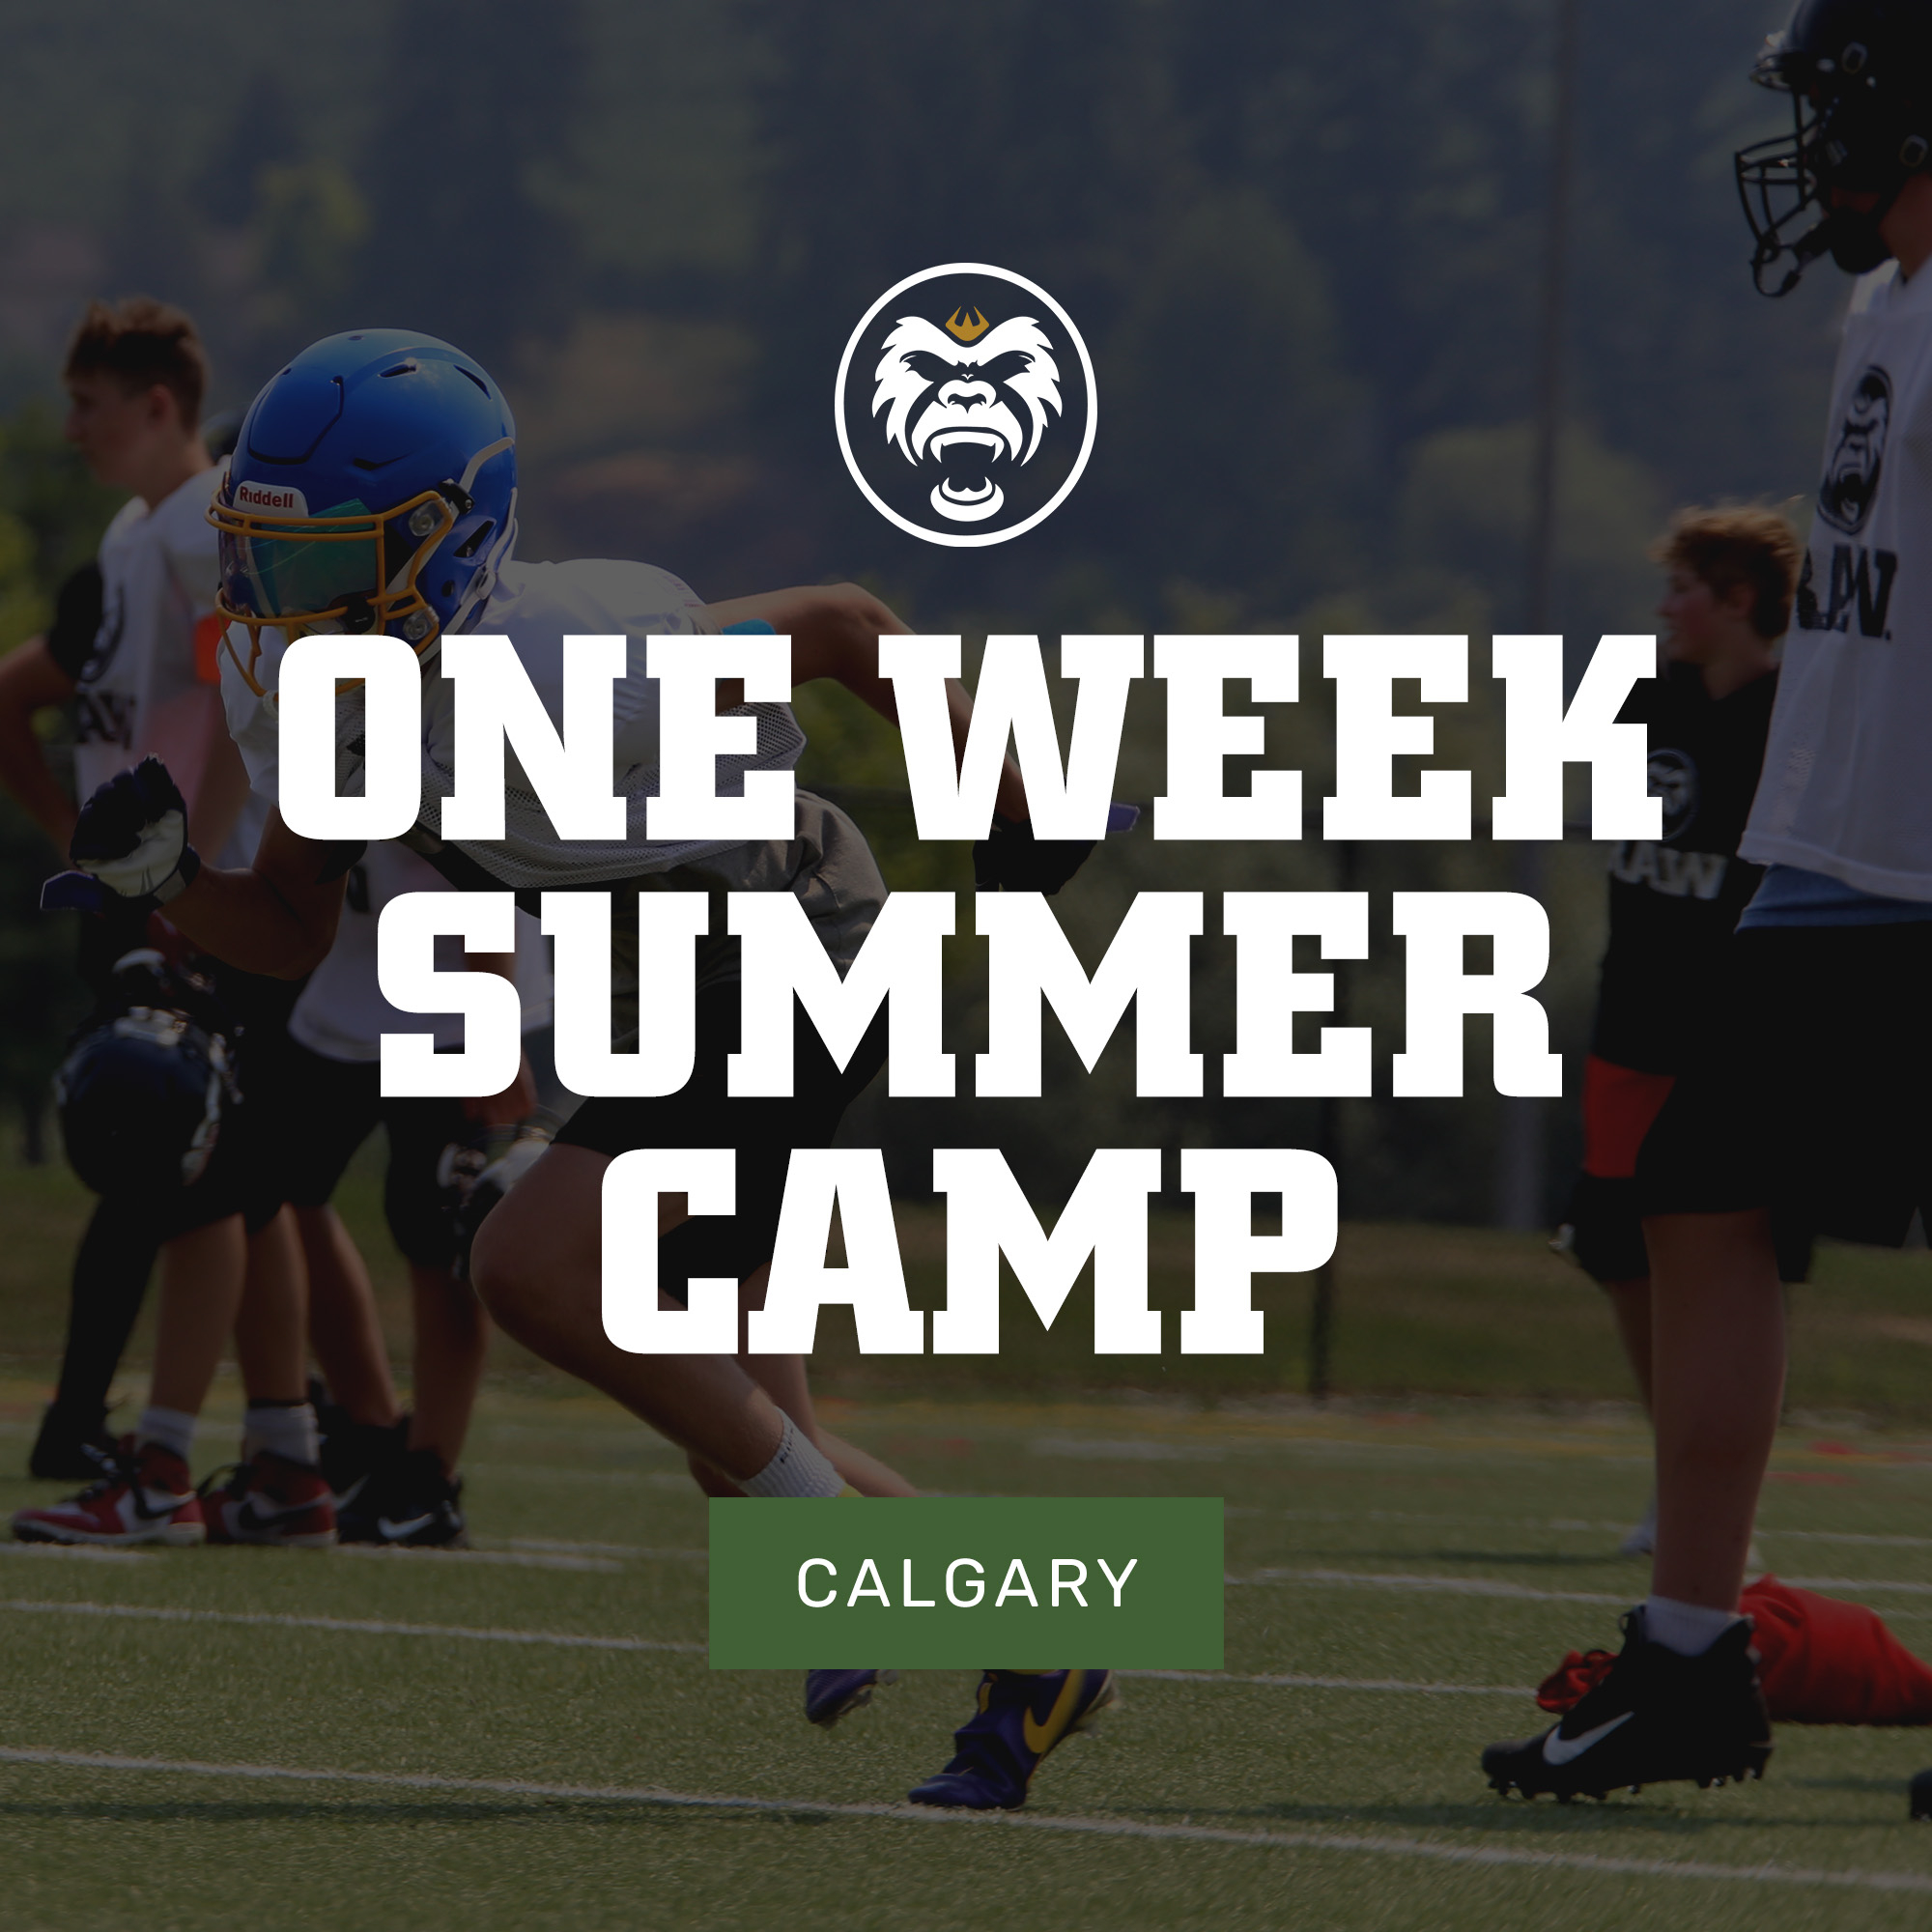 Friday's games: High school football players prepare with summer pass camp